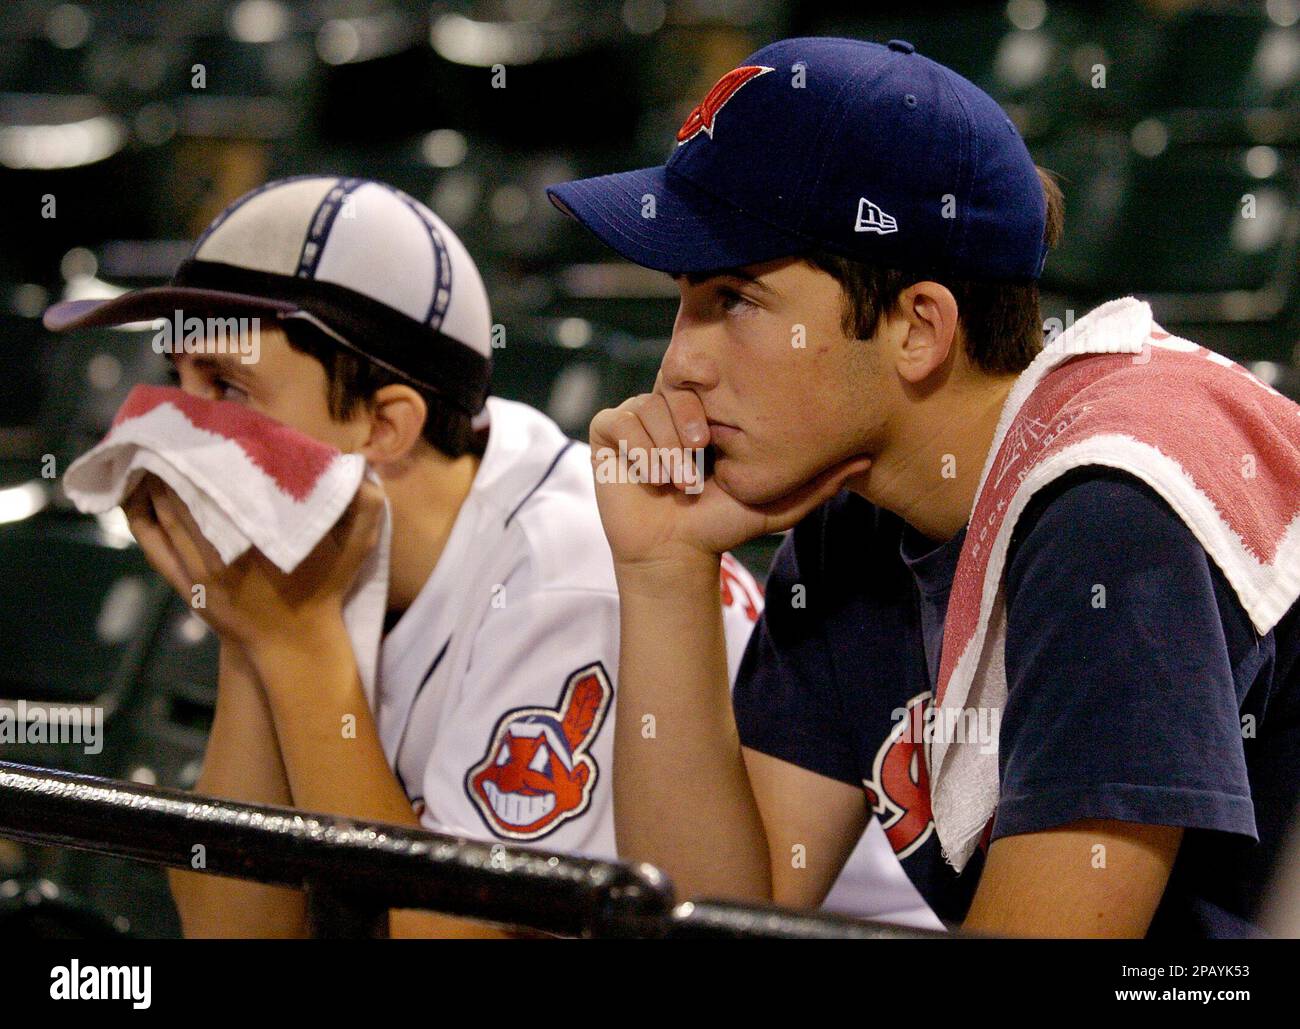 Cleveland Indians fans Nick Blum, right, and Anthony Mosinski watch a live telecast of Game 7 of the American League Championship baseball series between the Indians and the Boston Red Sox at